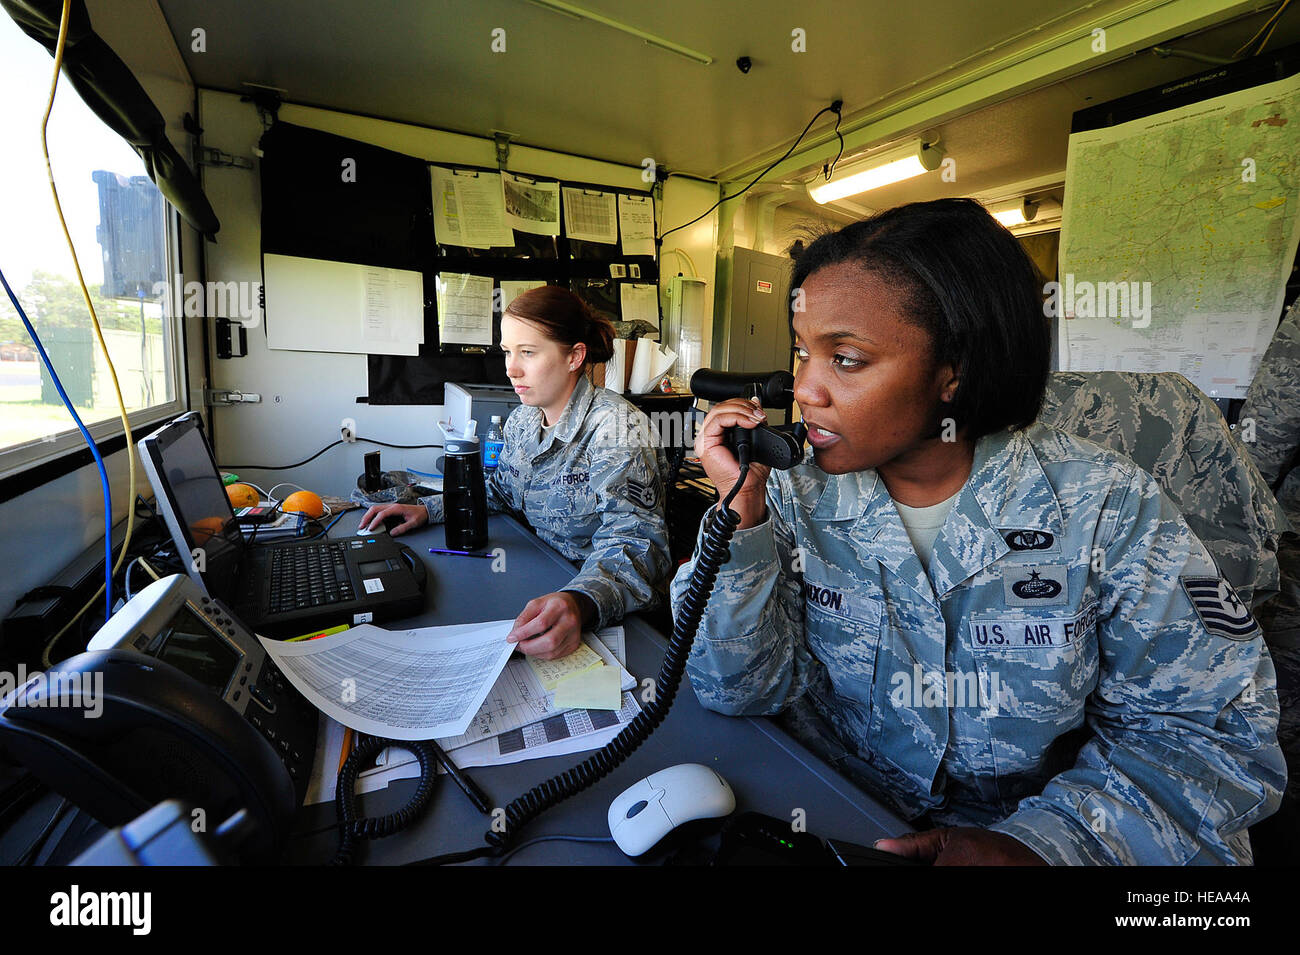 From left, U.S Air Force Staff Sgt. Nicole Shreffler and Tech. Sgt. Haniyyah Nixon, command post controllers from the 621st Contingency Response Wing, at Joint Base McGuire-Dix-Lakehurst, N.J. provide air mobility logistics support at Mackall Army Airfield, N.C. during Joint Operational Access Exercise 12-02, June 6, 2012.  The JOAX is a two-week forcible entry and ground combat exercise to prepare Air Force and Army service members to respond to worldwide crises and contingencies. Stock Photo